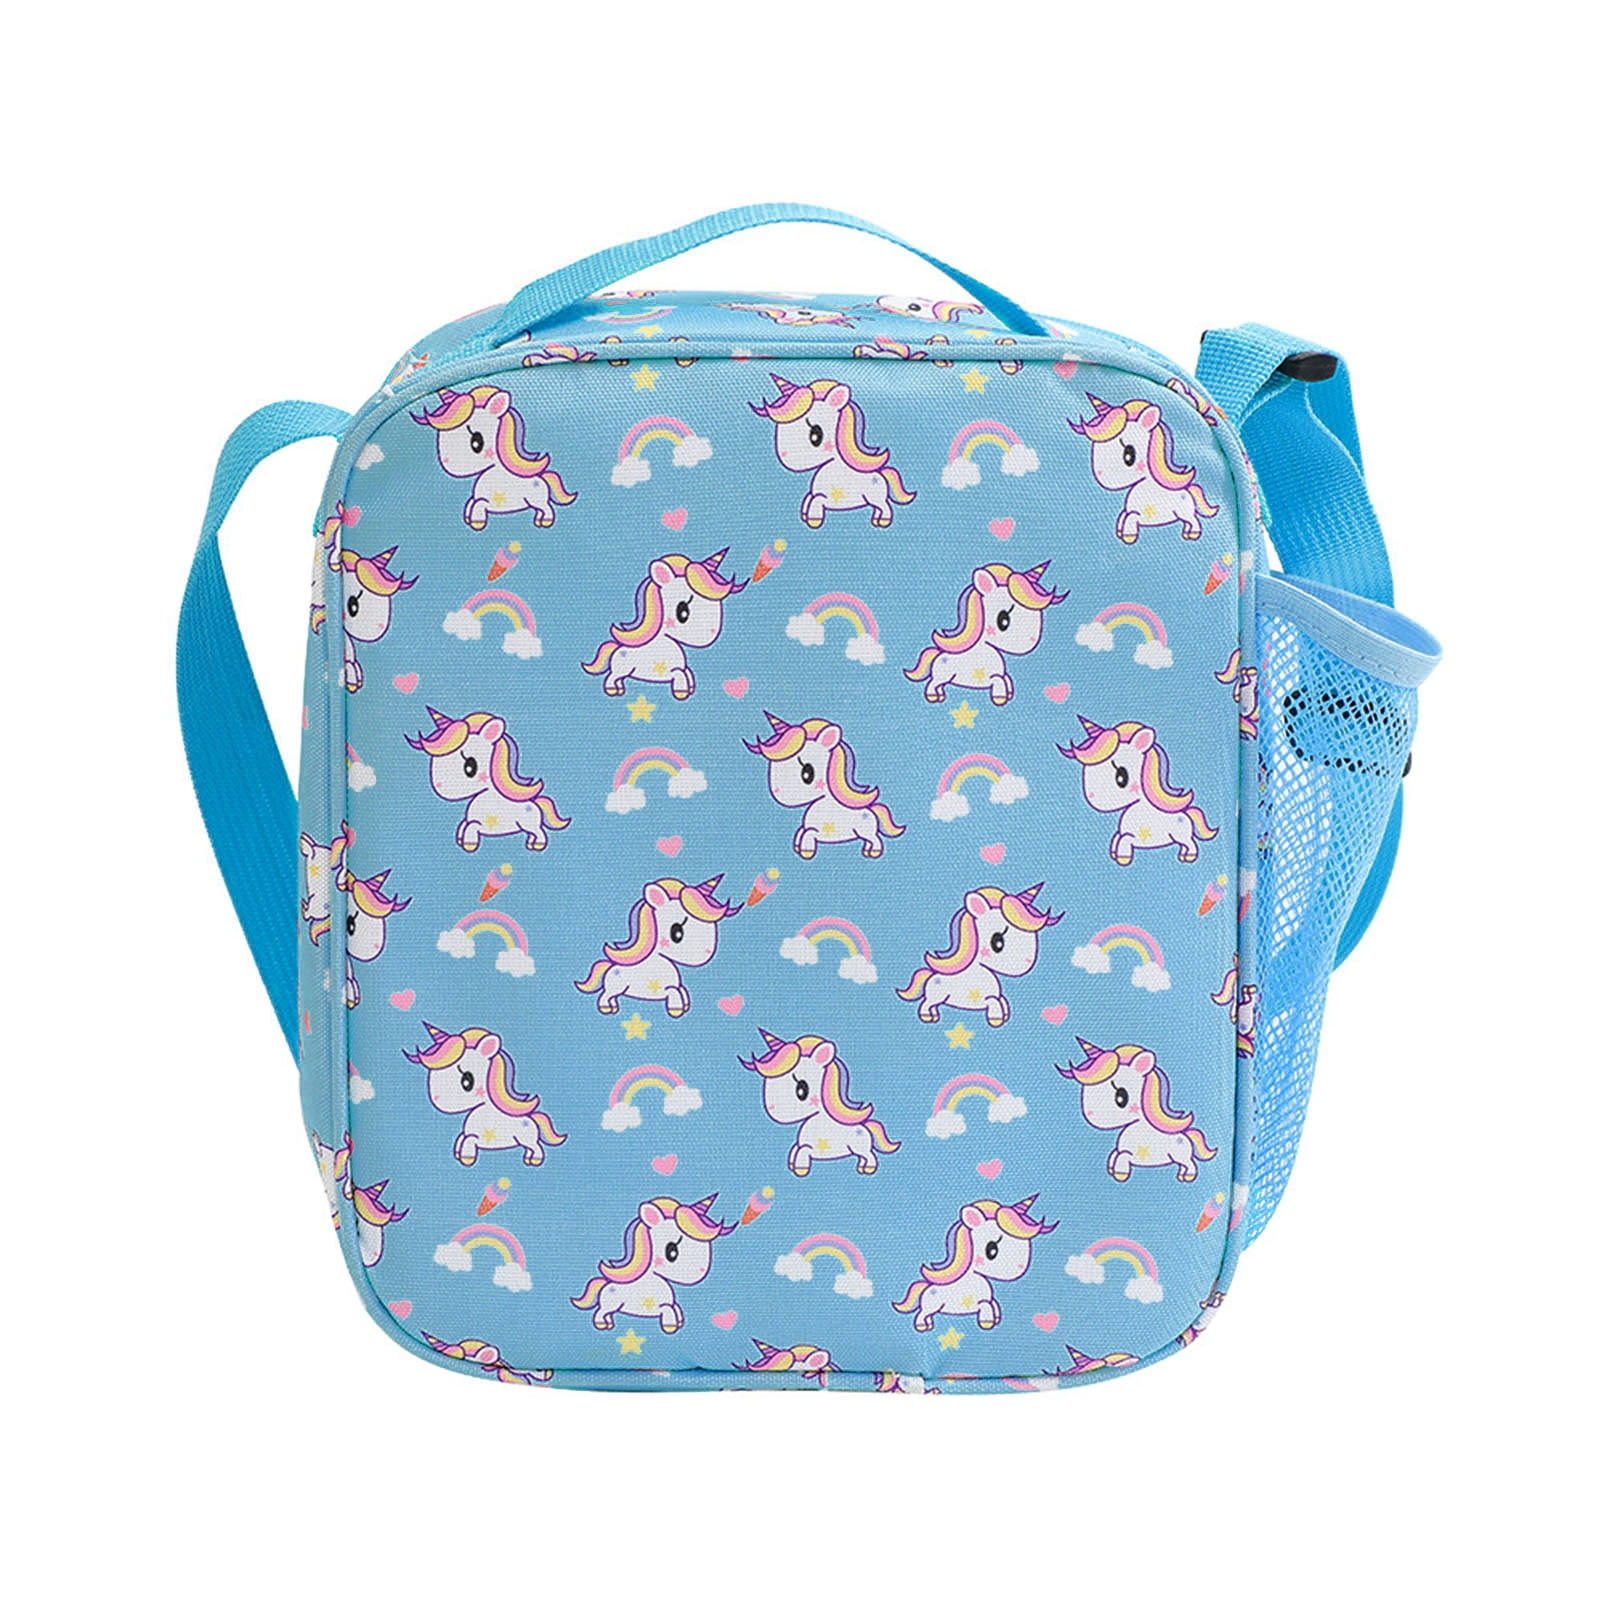 bdbkywy unicorn lunch bag lunch box set - insulated lunch bag with